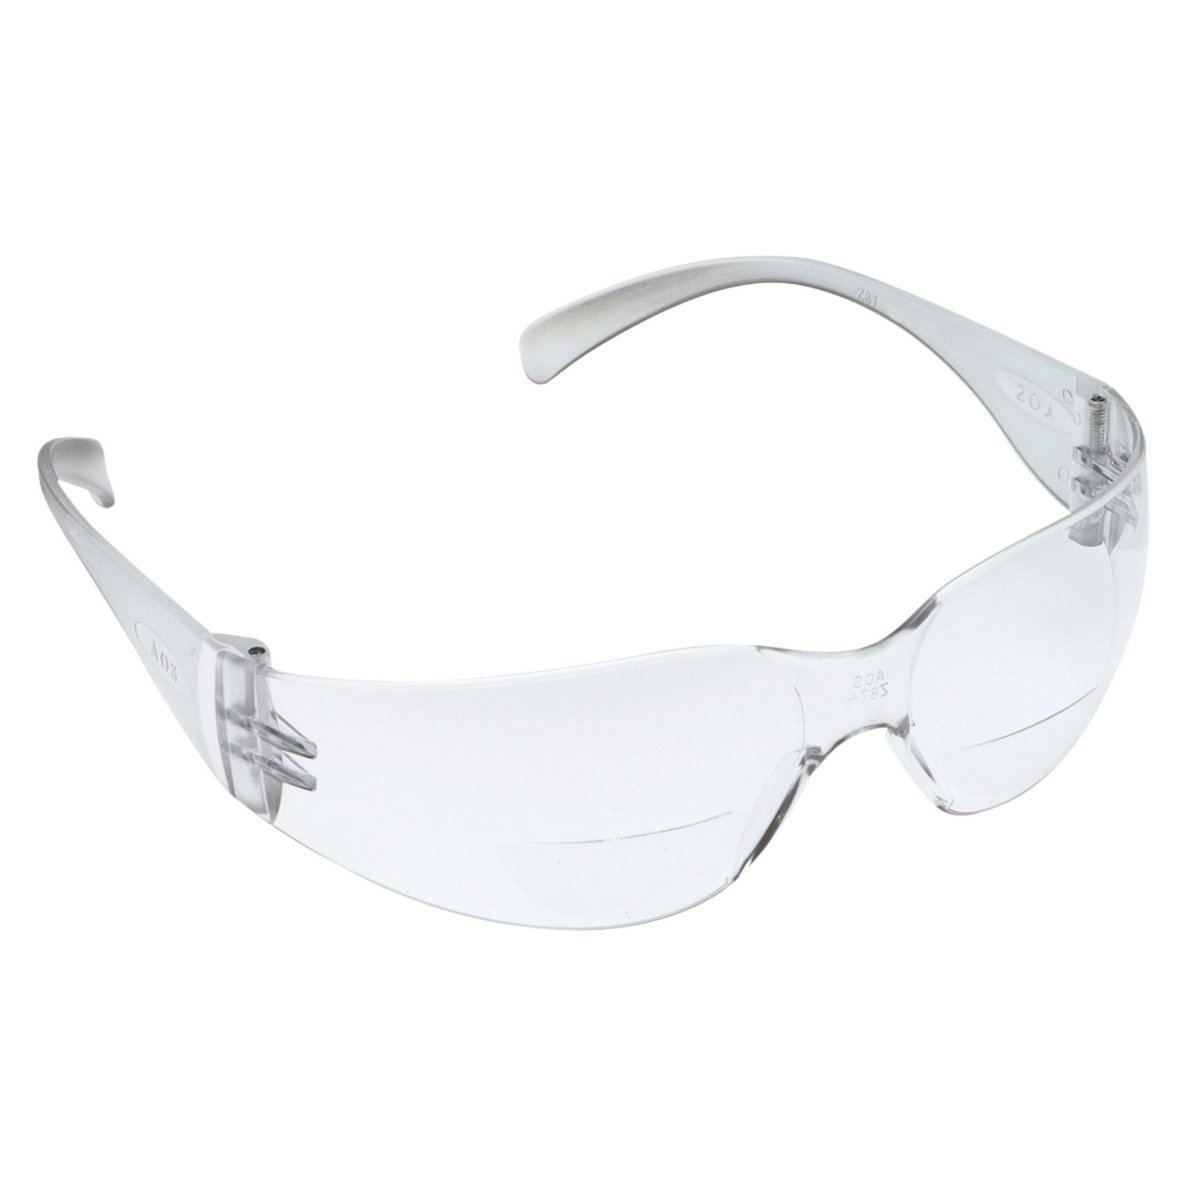 3M™ Virtua™ Reader Protective Eyewear 11515-00000-20 Clear Anti-Fog Lens, Clear Temple, +2.5 Diopter (Availability restrictions